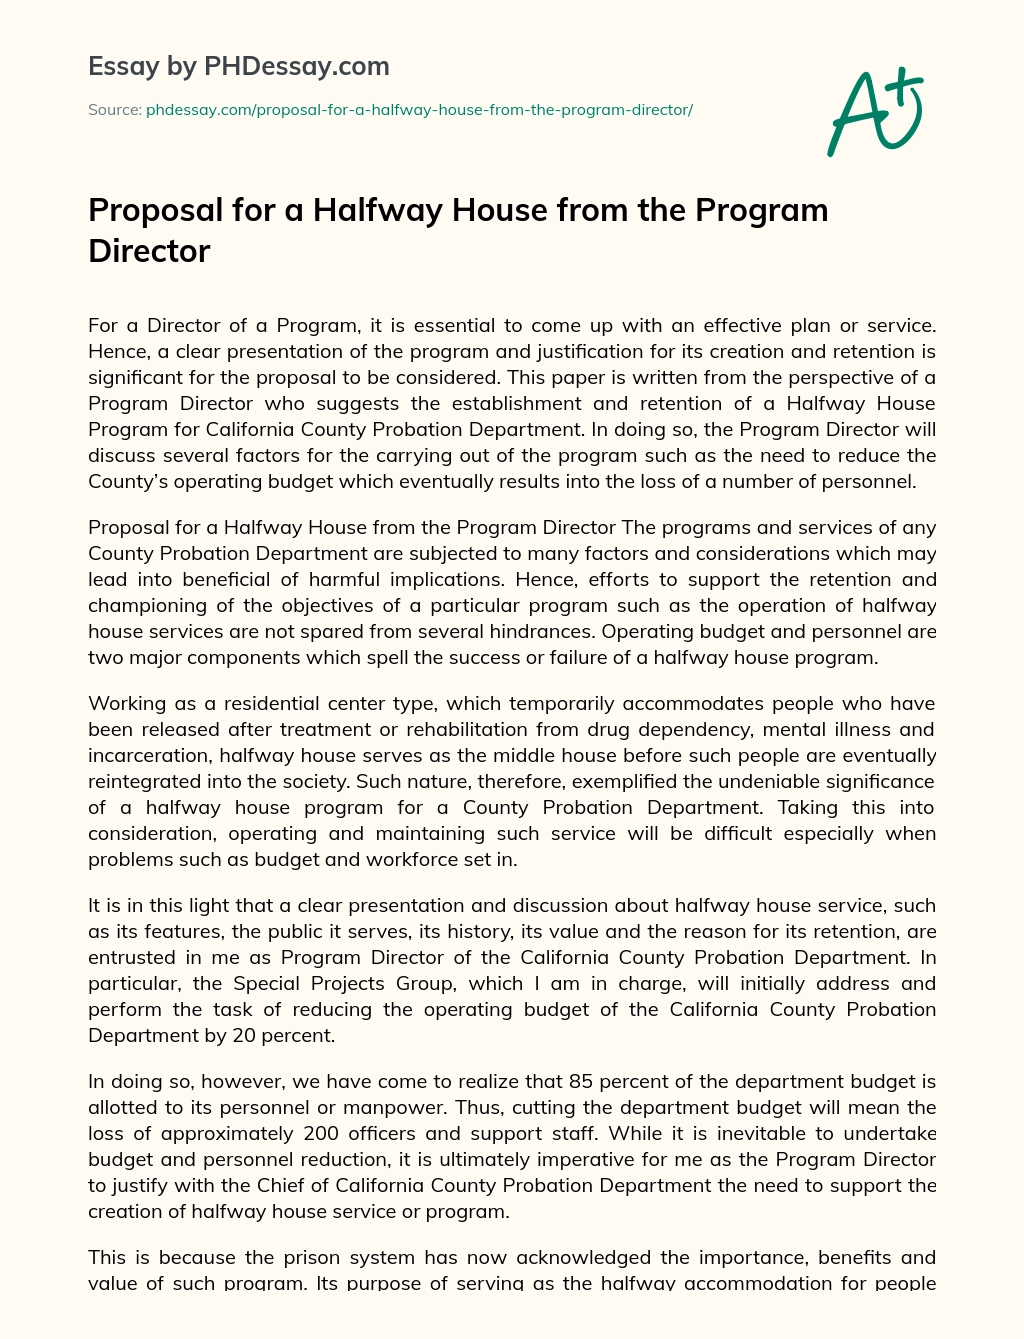 Proposal for a Halfway House from the Program Director essay